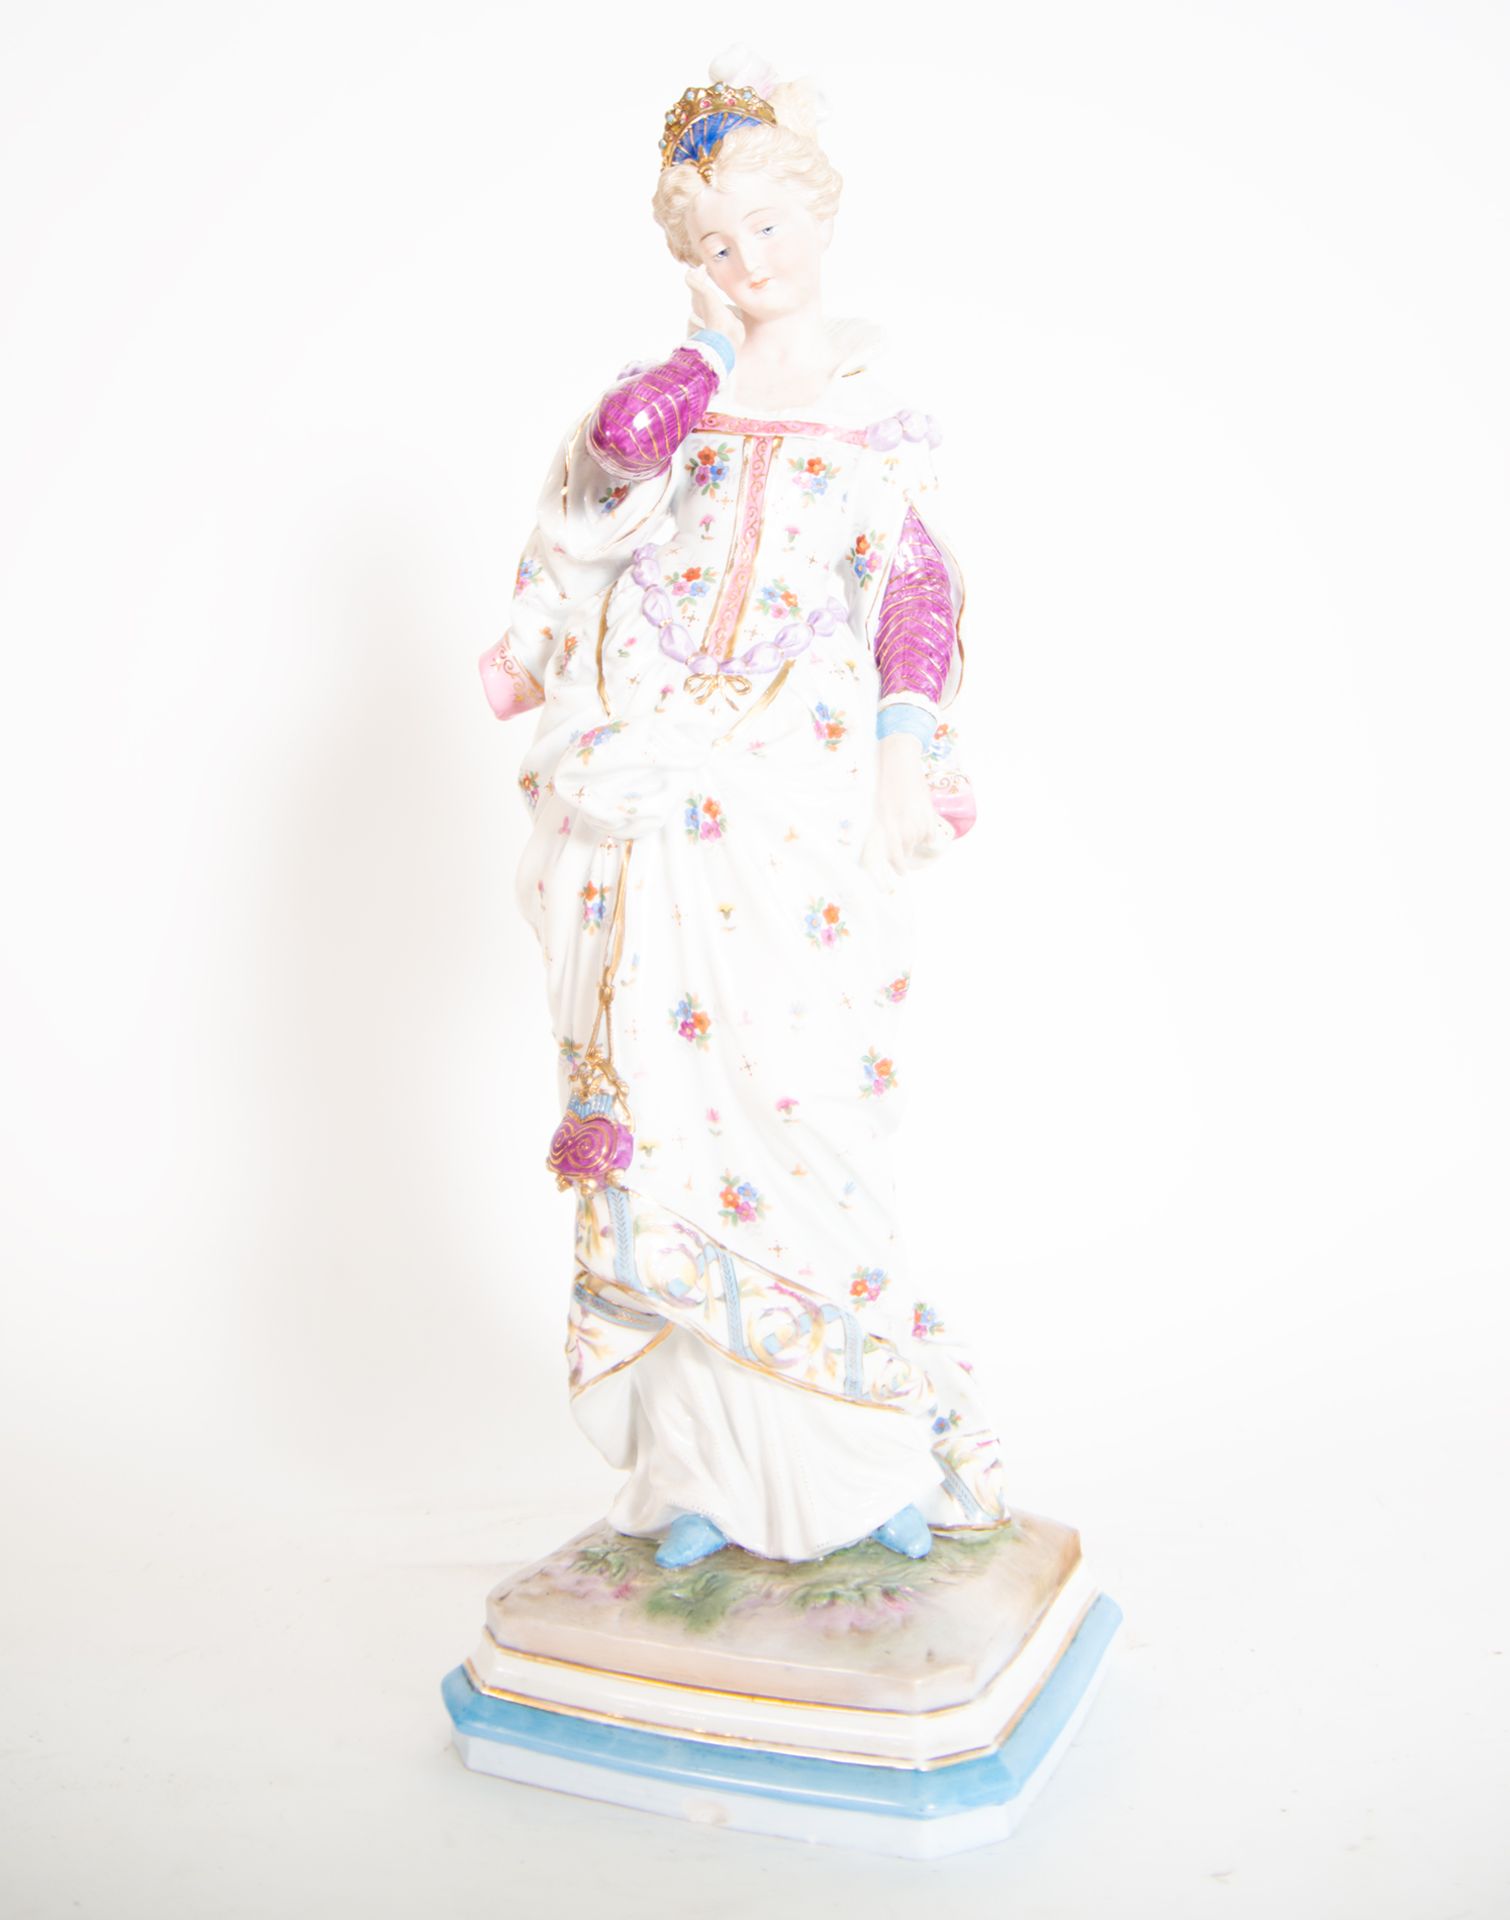 Lady and Gentleman in Polychrome Biscuit Porcelain, Vienna, 19th - 20th centuries - Image 6 of 8